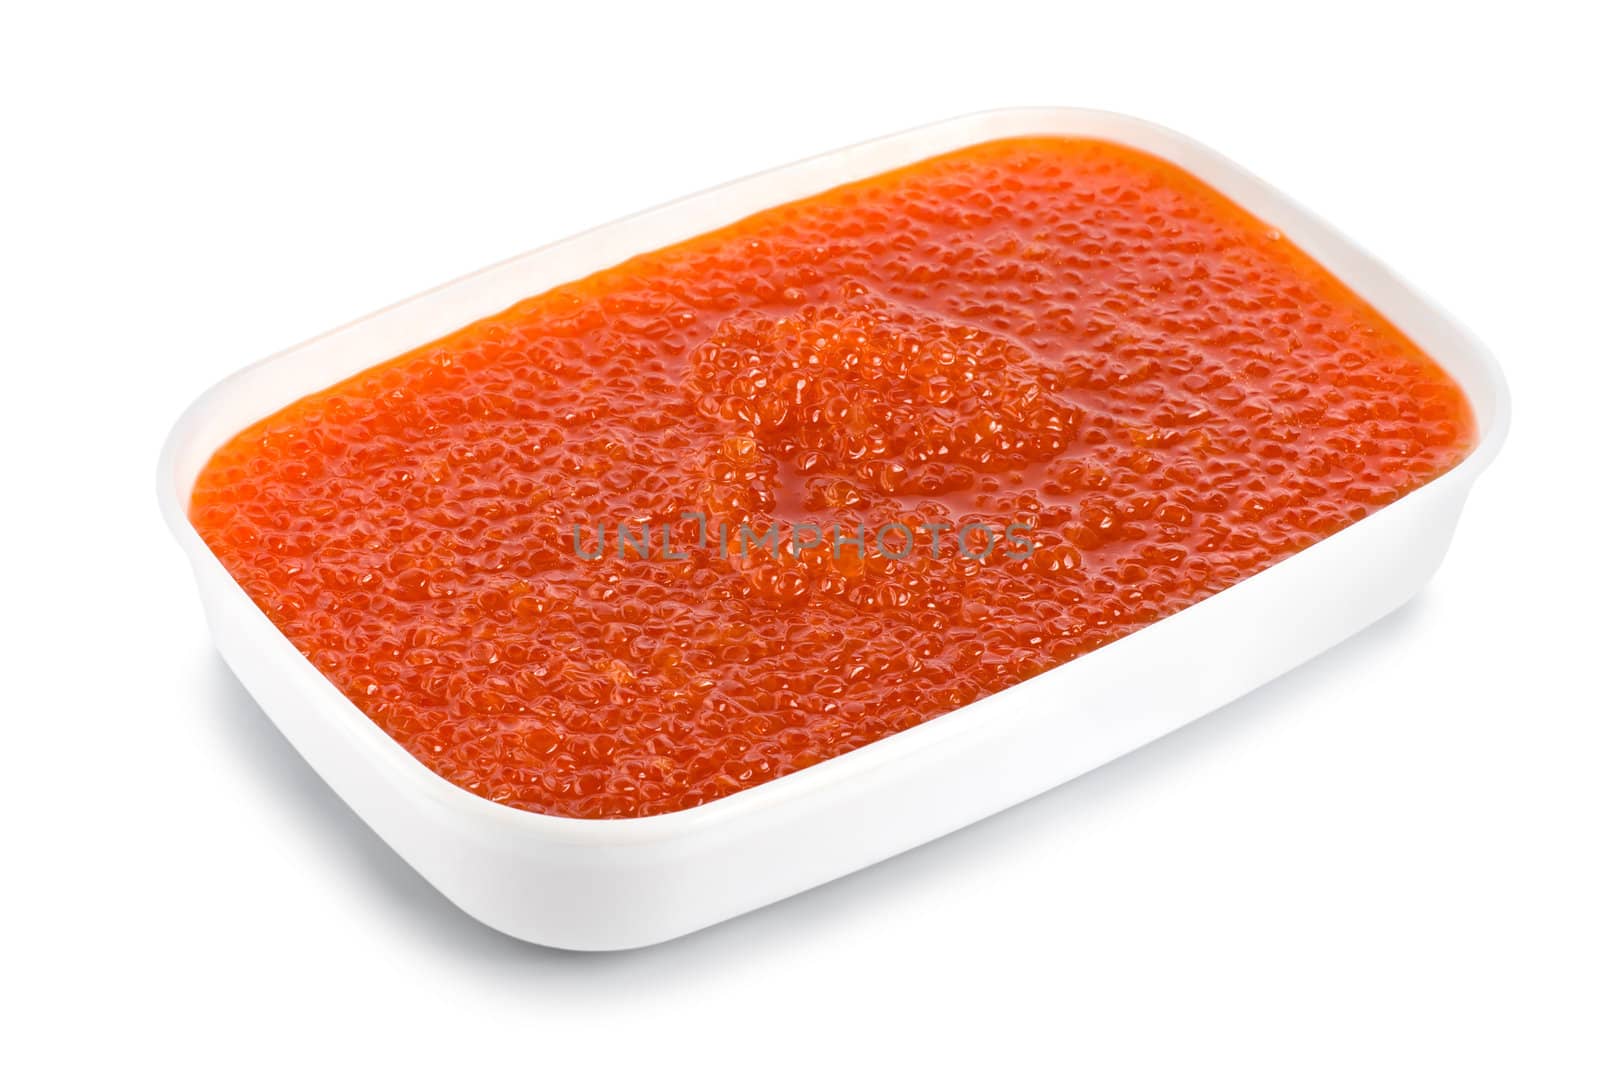 Red caviar in a plastic container by Givaga